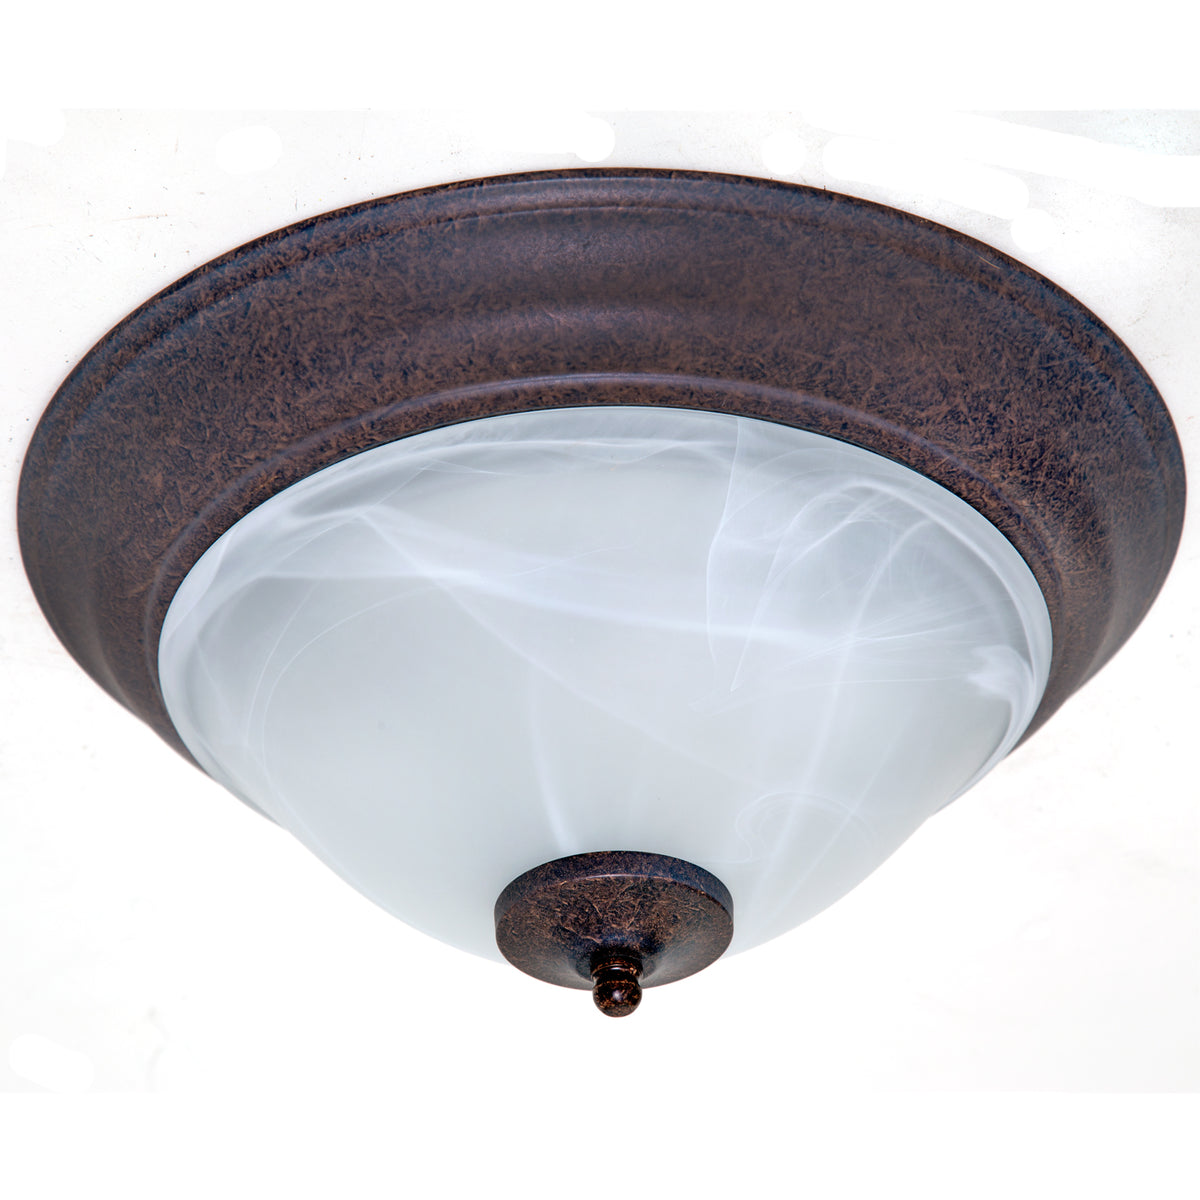 buy ceiling light fixtures at cheap rate in bulk. wholesale & retail lighting equipments store. home décor ideas, maintenance, repair replacement parts